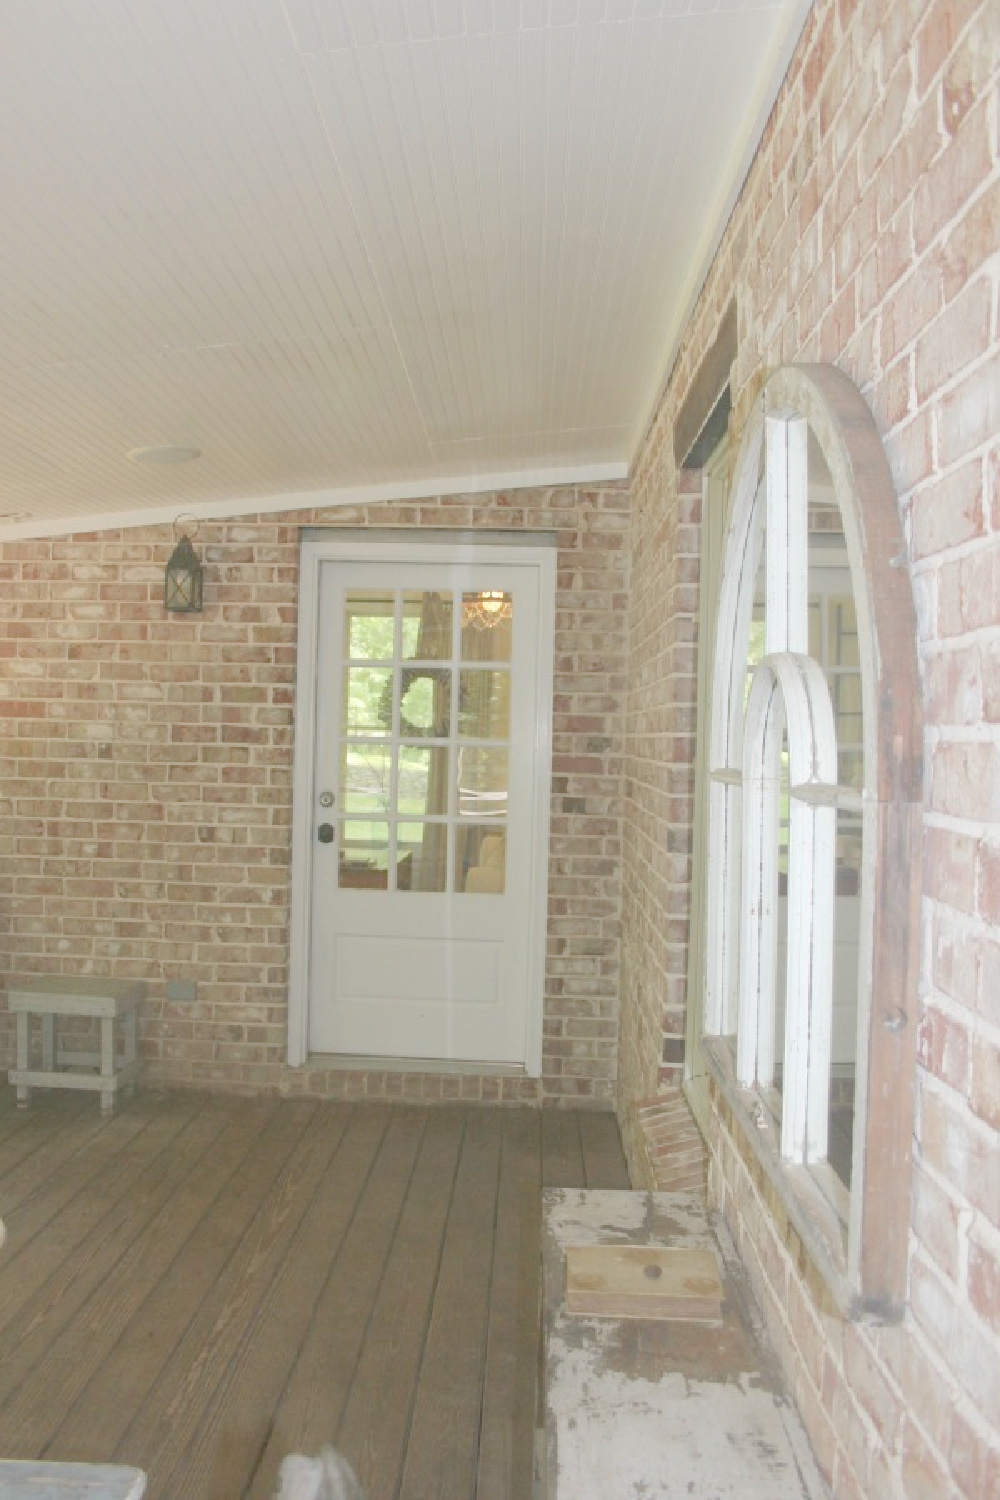 Brick screen porch at rustic country cottage in Leiper's Fork, TN known as storybook cottage - Hello Lovely Studio.